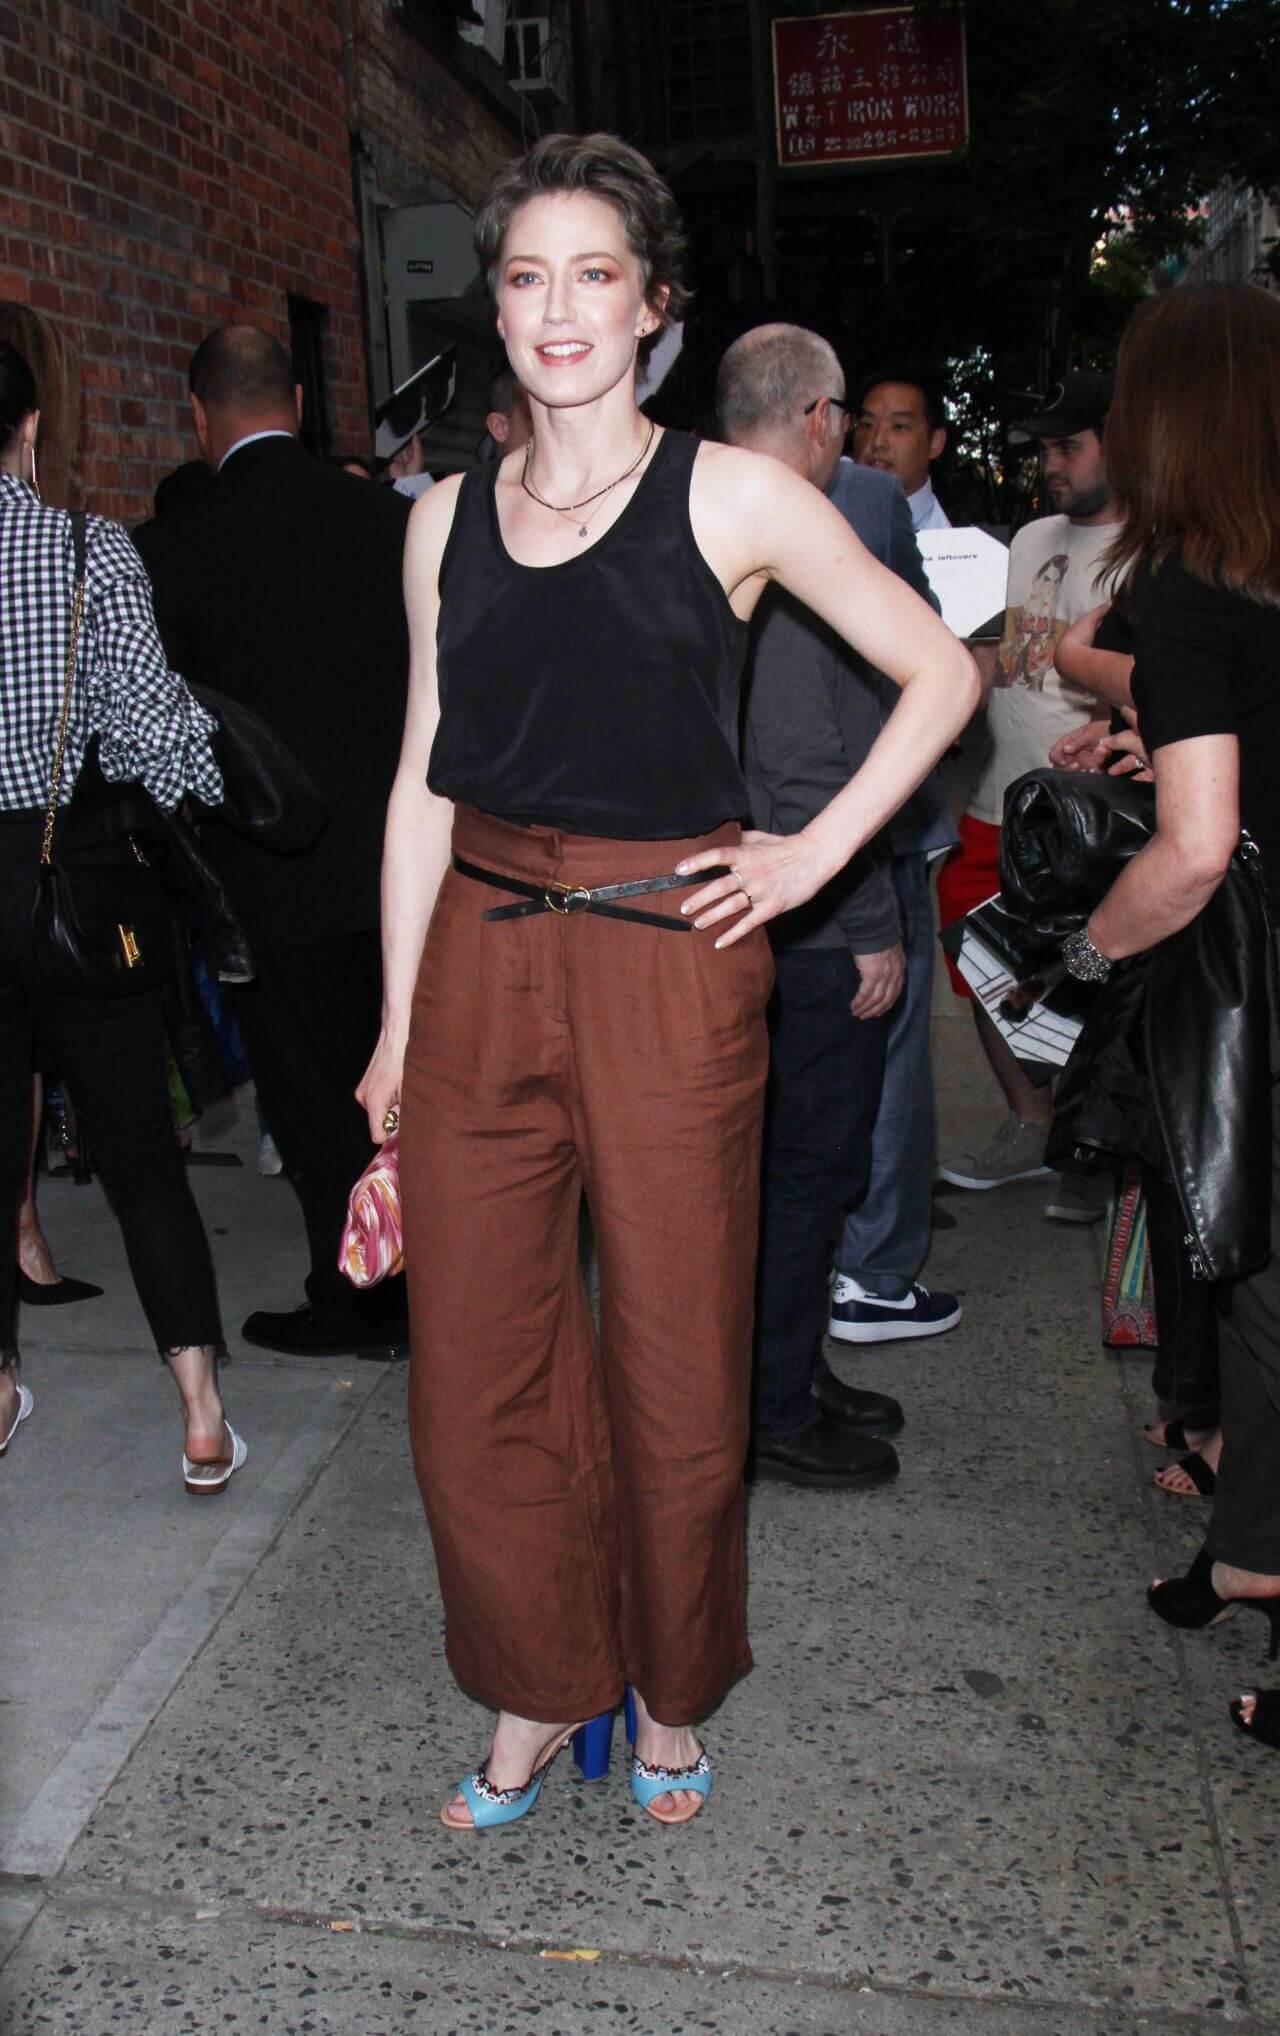 Carrie Coon  In Black Crop Top With Copper Pants At “The Leftovers” Screening and Panel in NYC